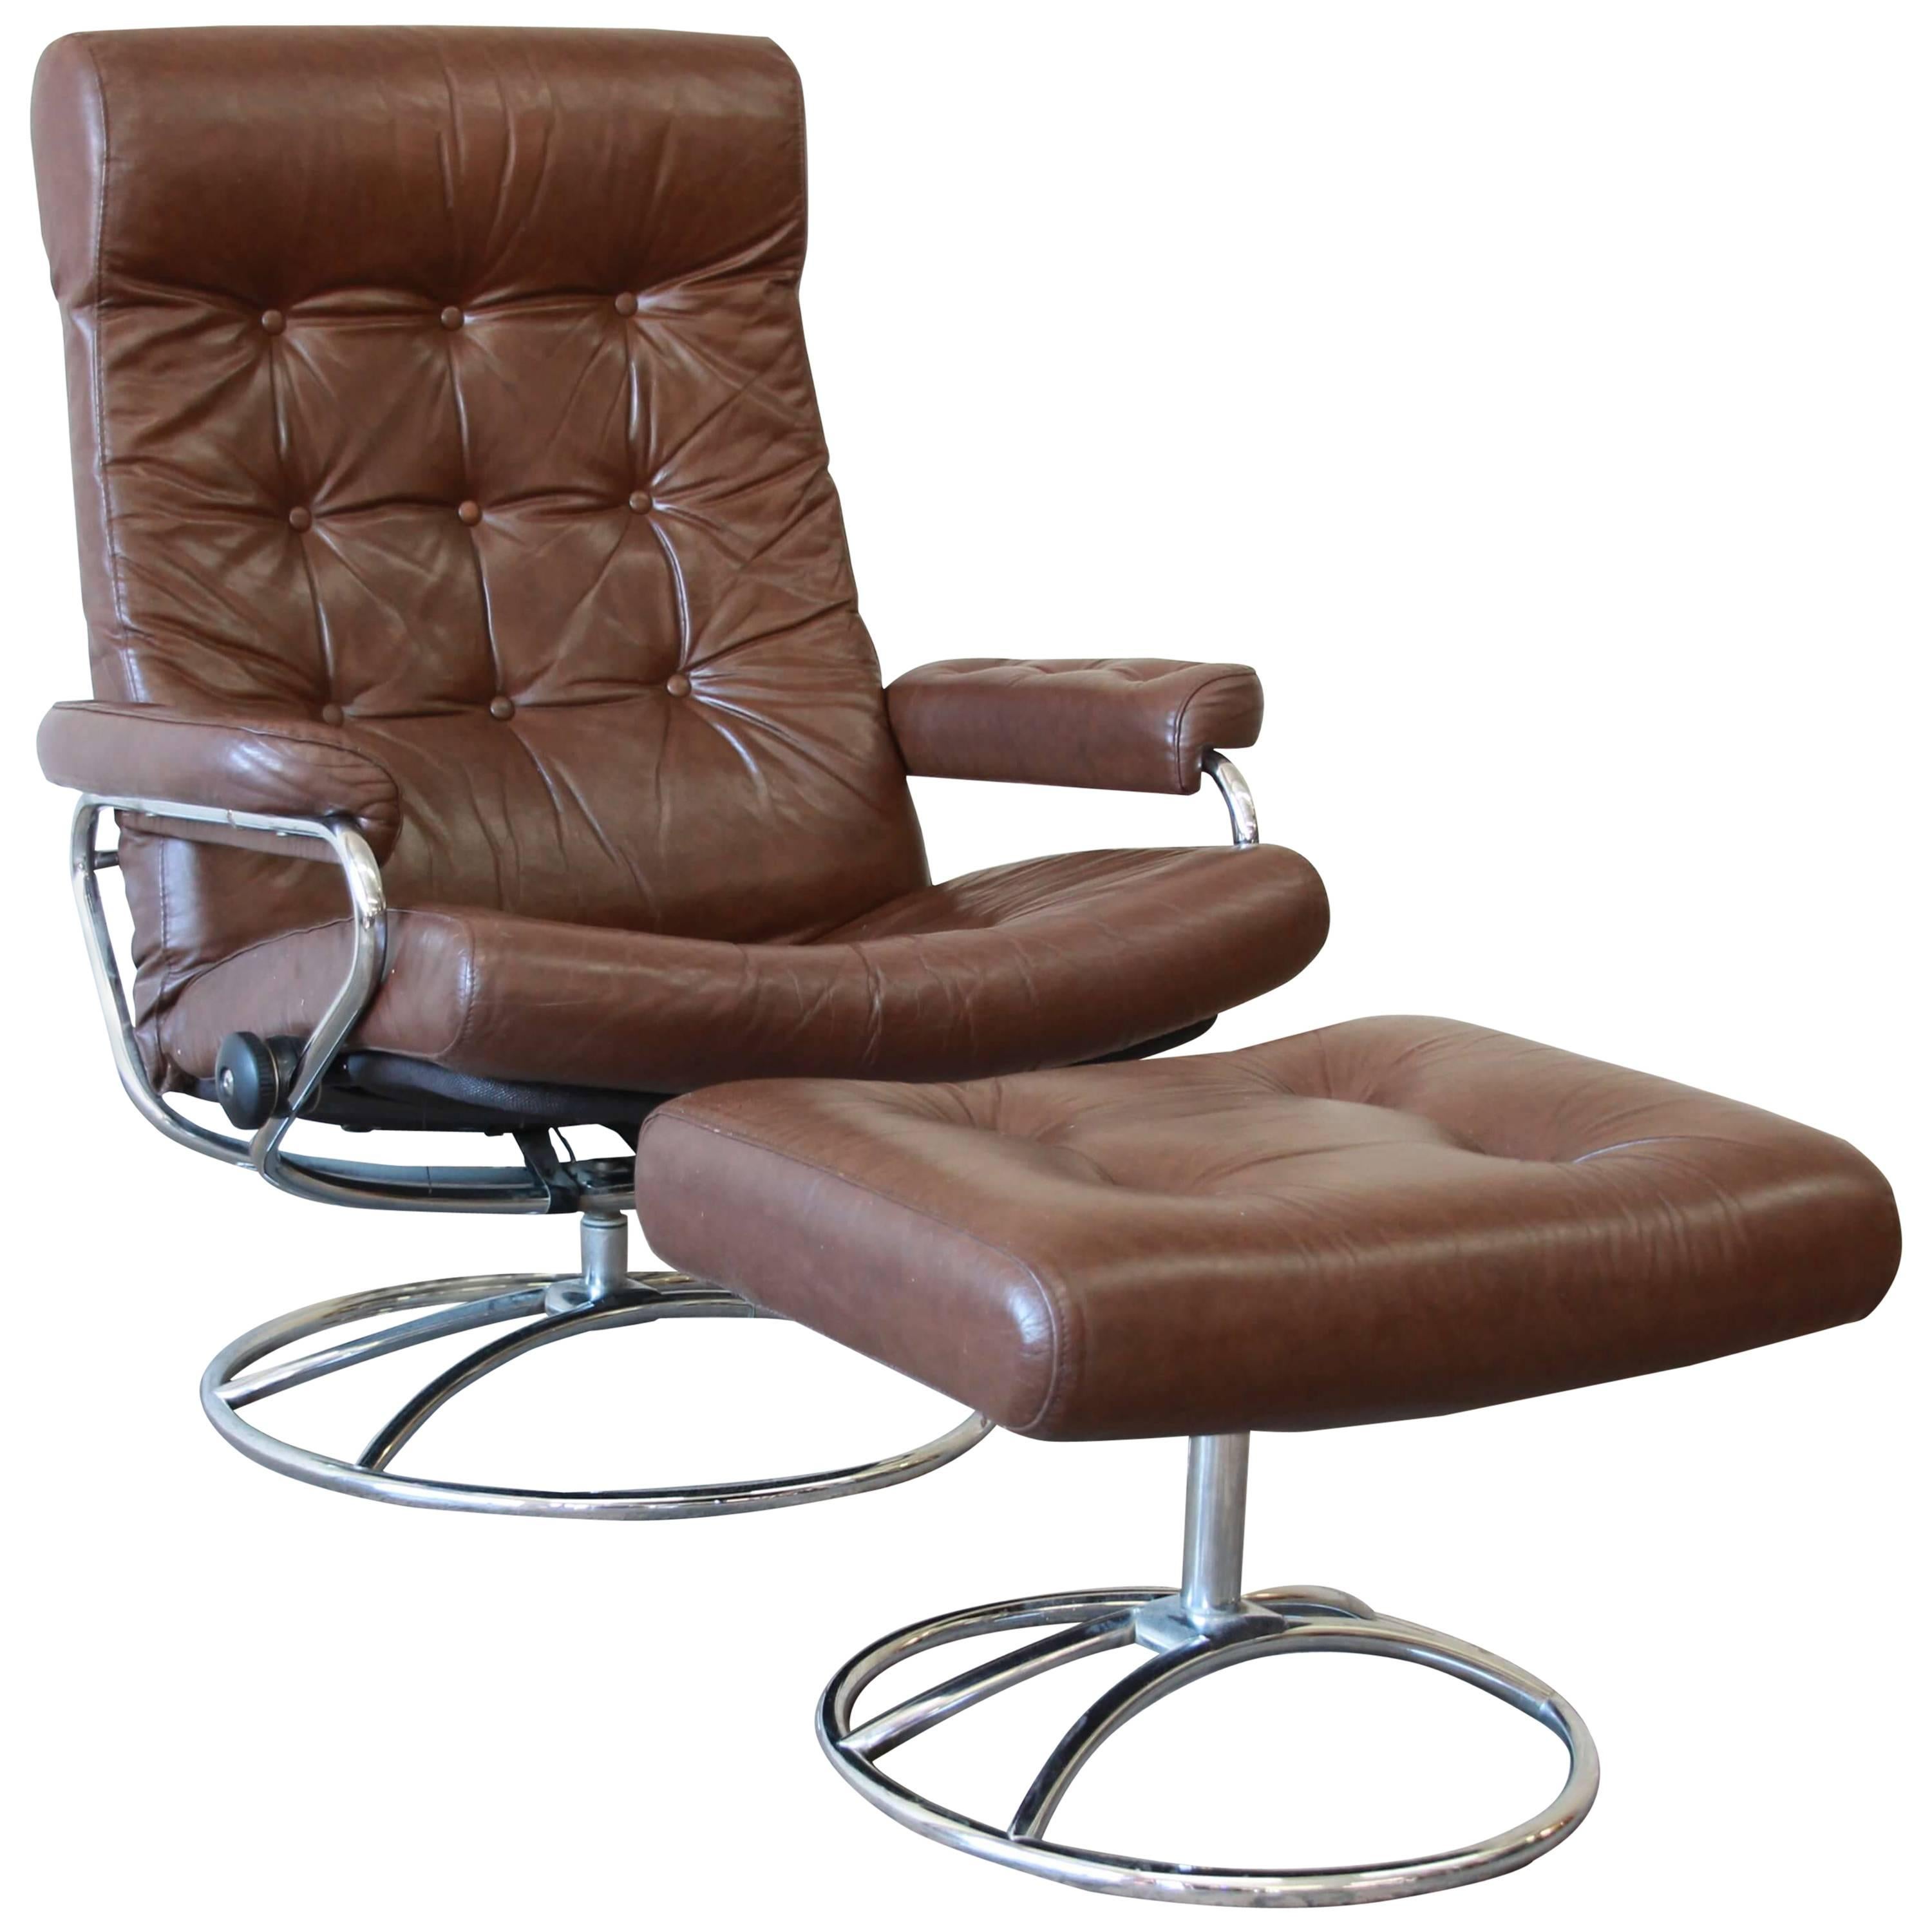 Vintage Brown Leather Ekornes Stressless Lounge Chair with Ottoman